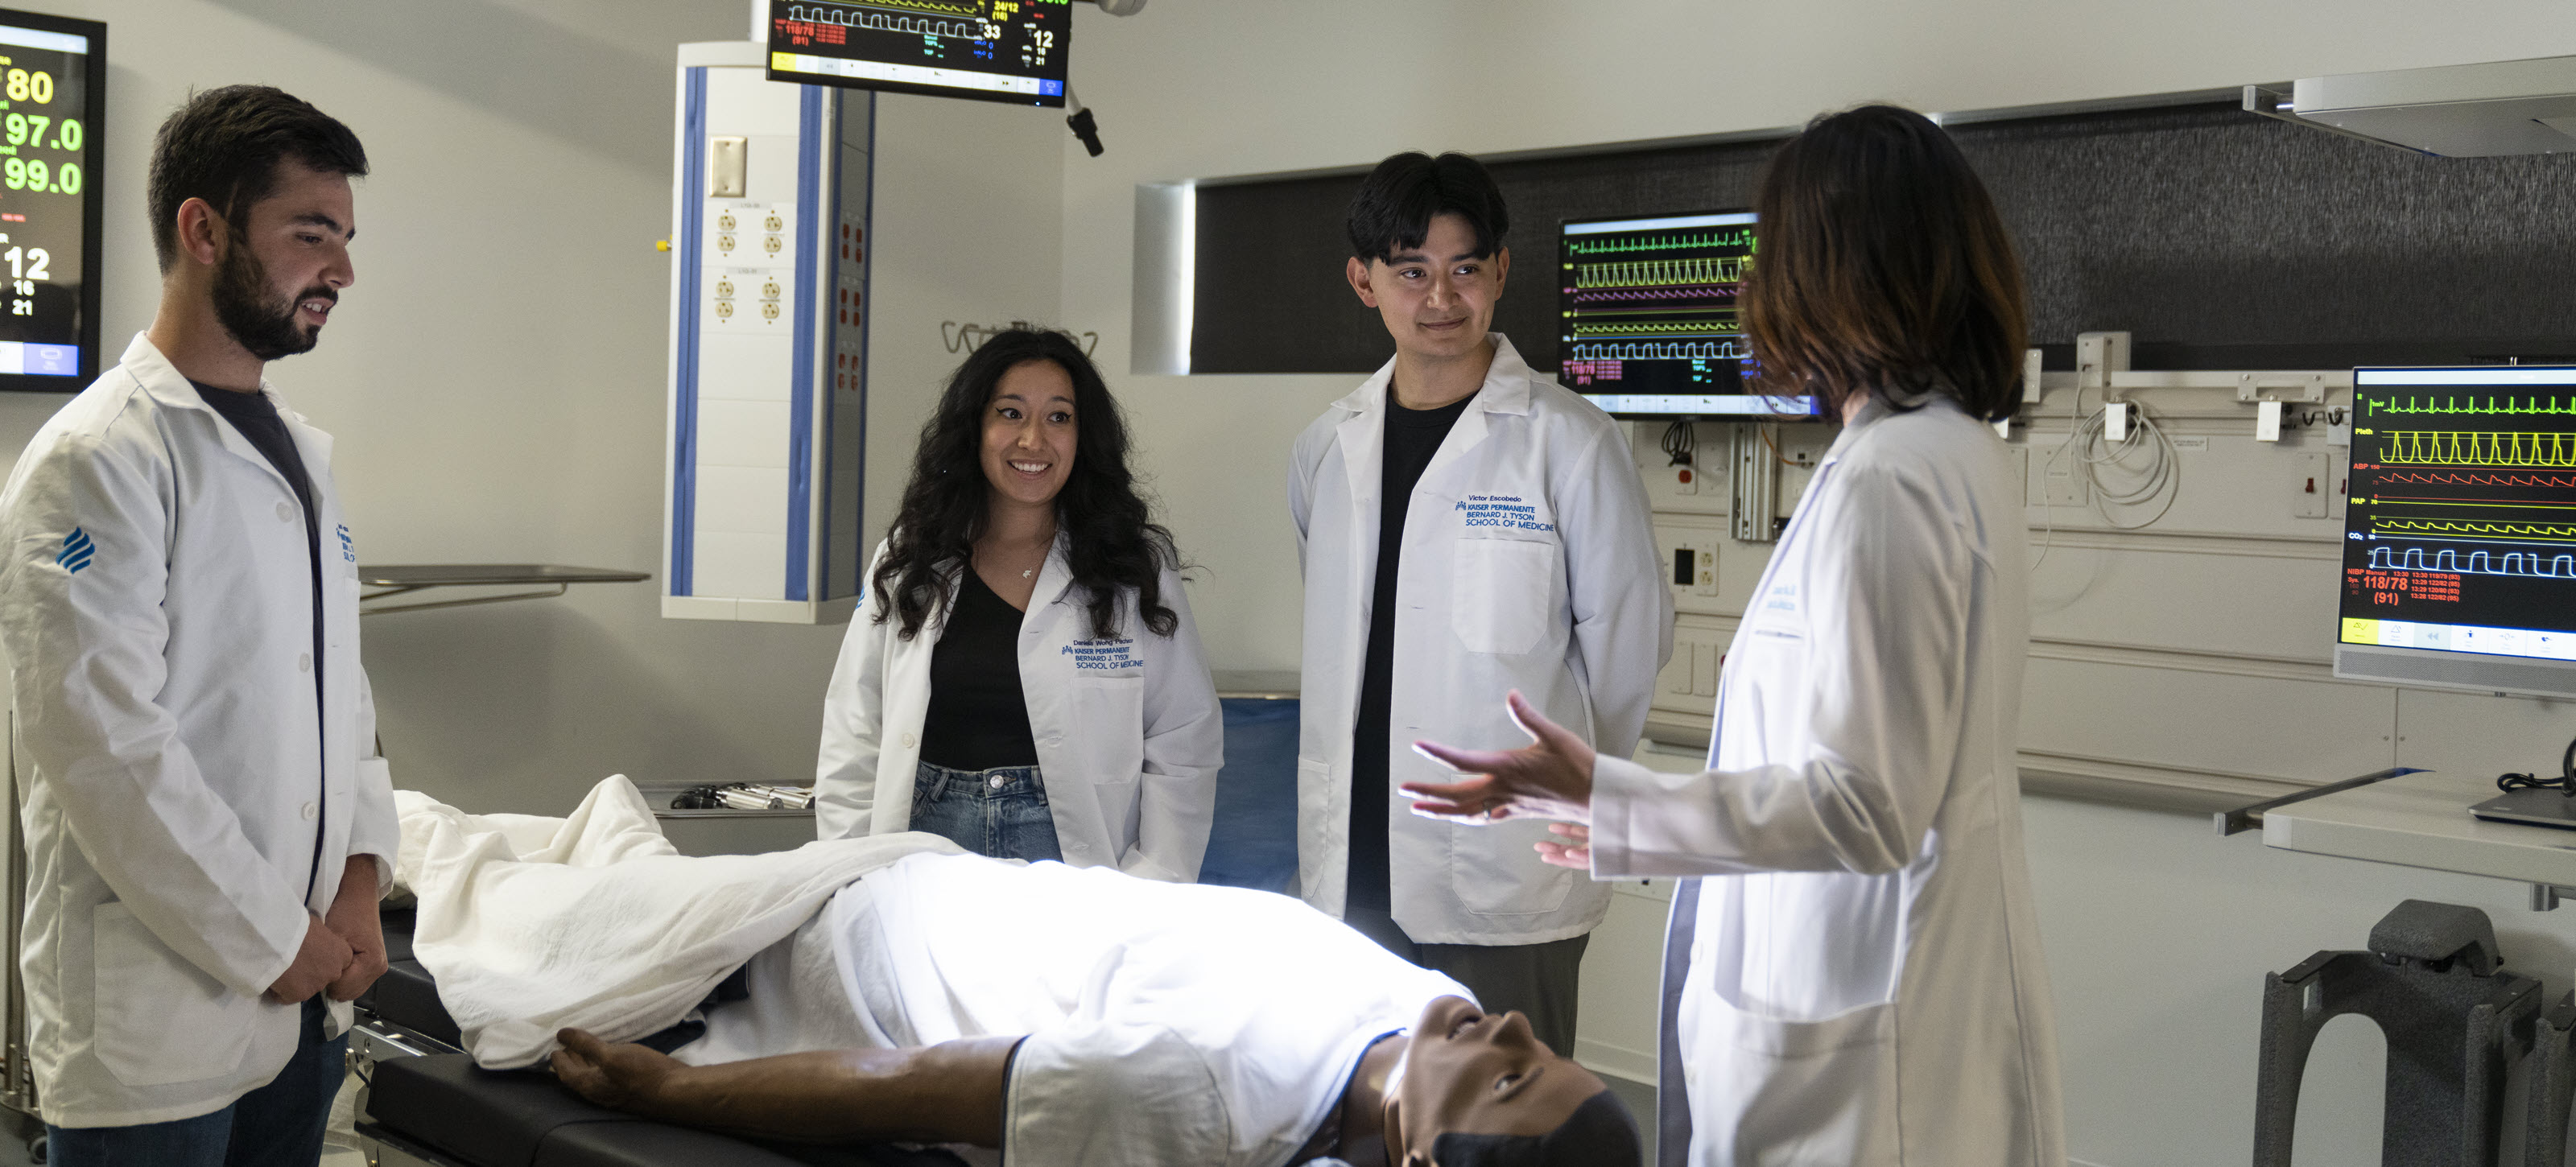 Four medical students in the Simulation Center.